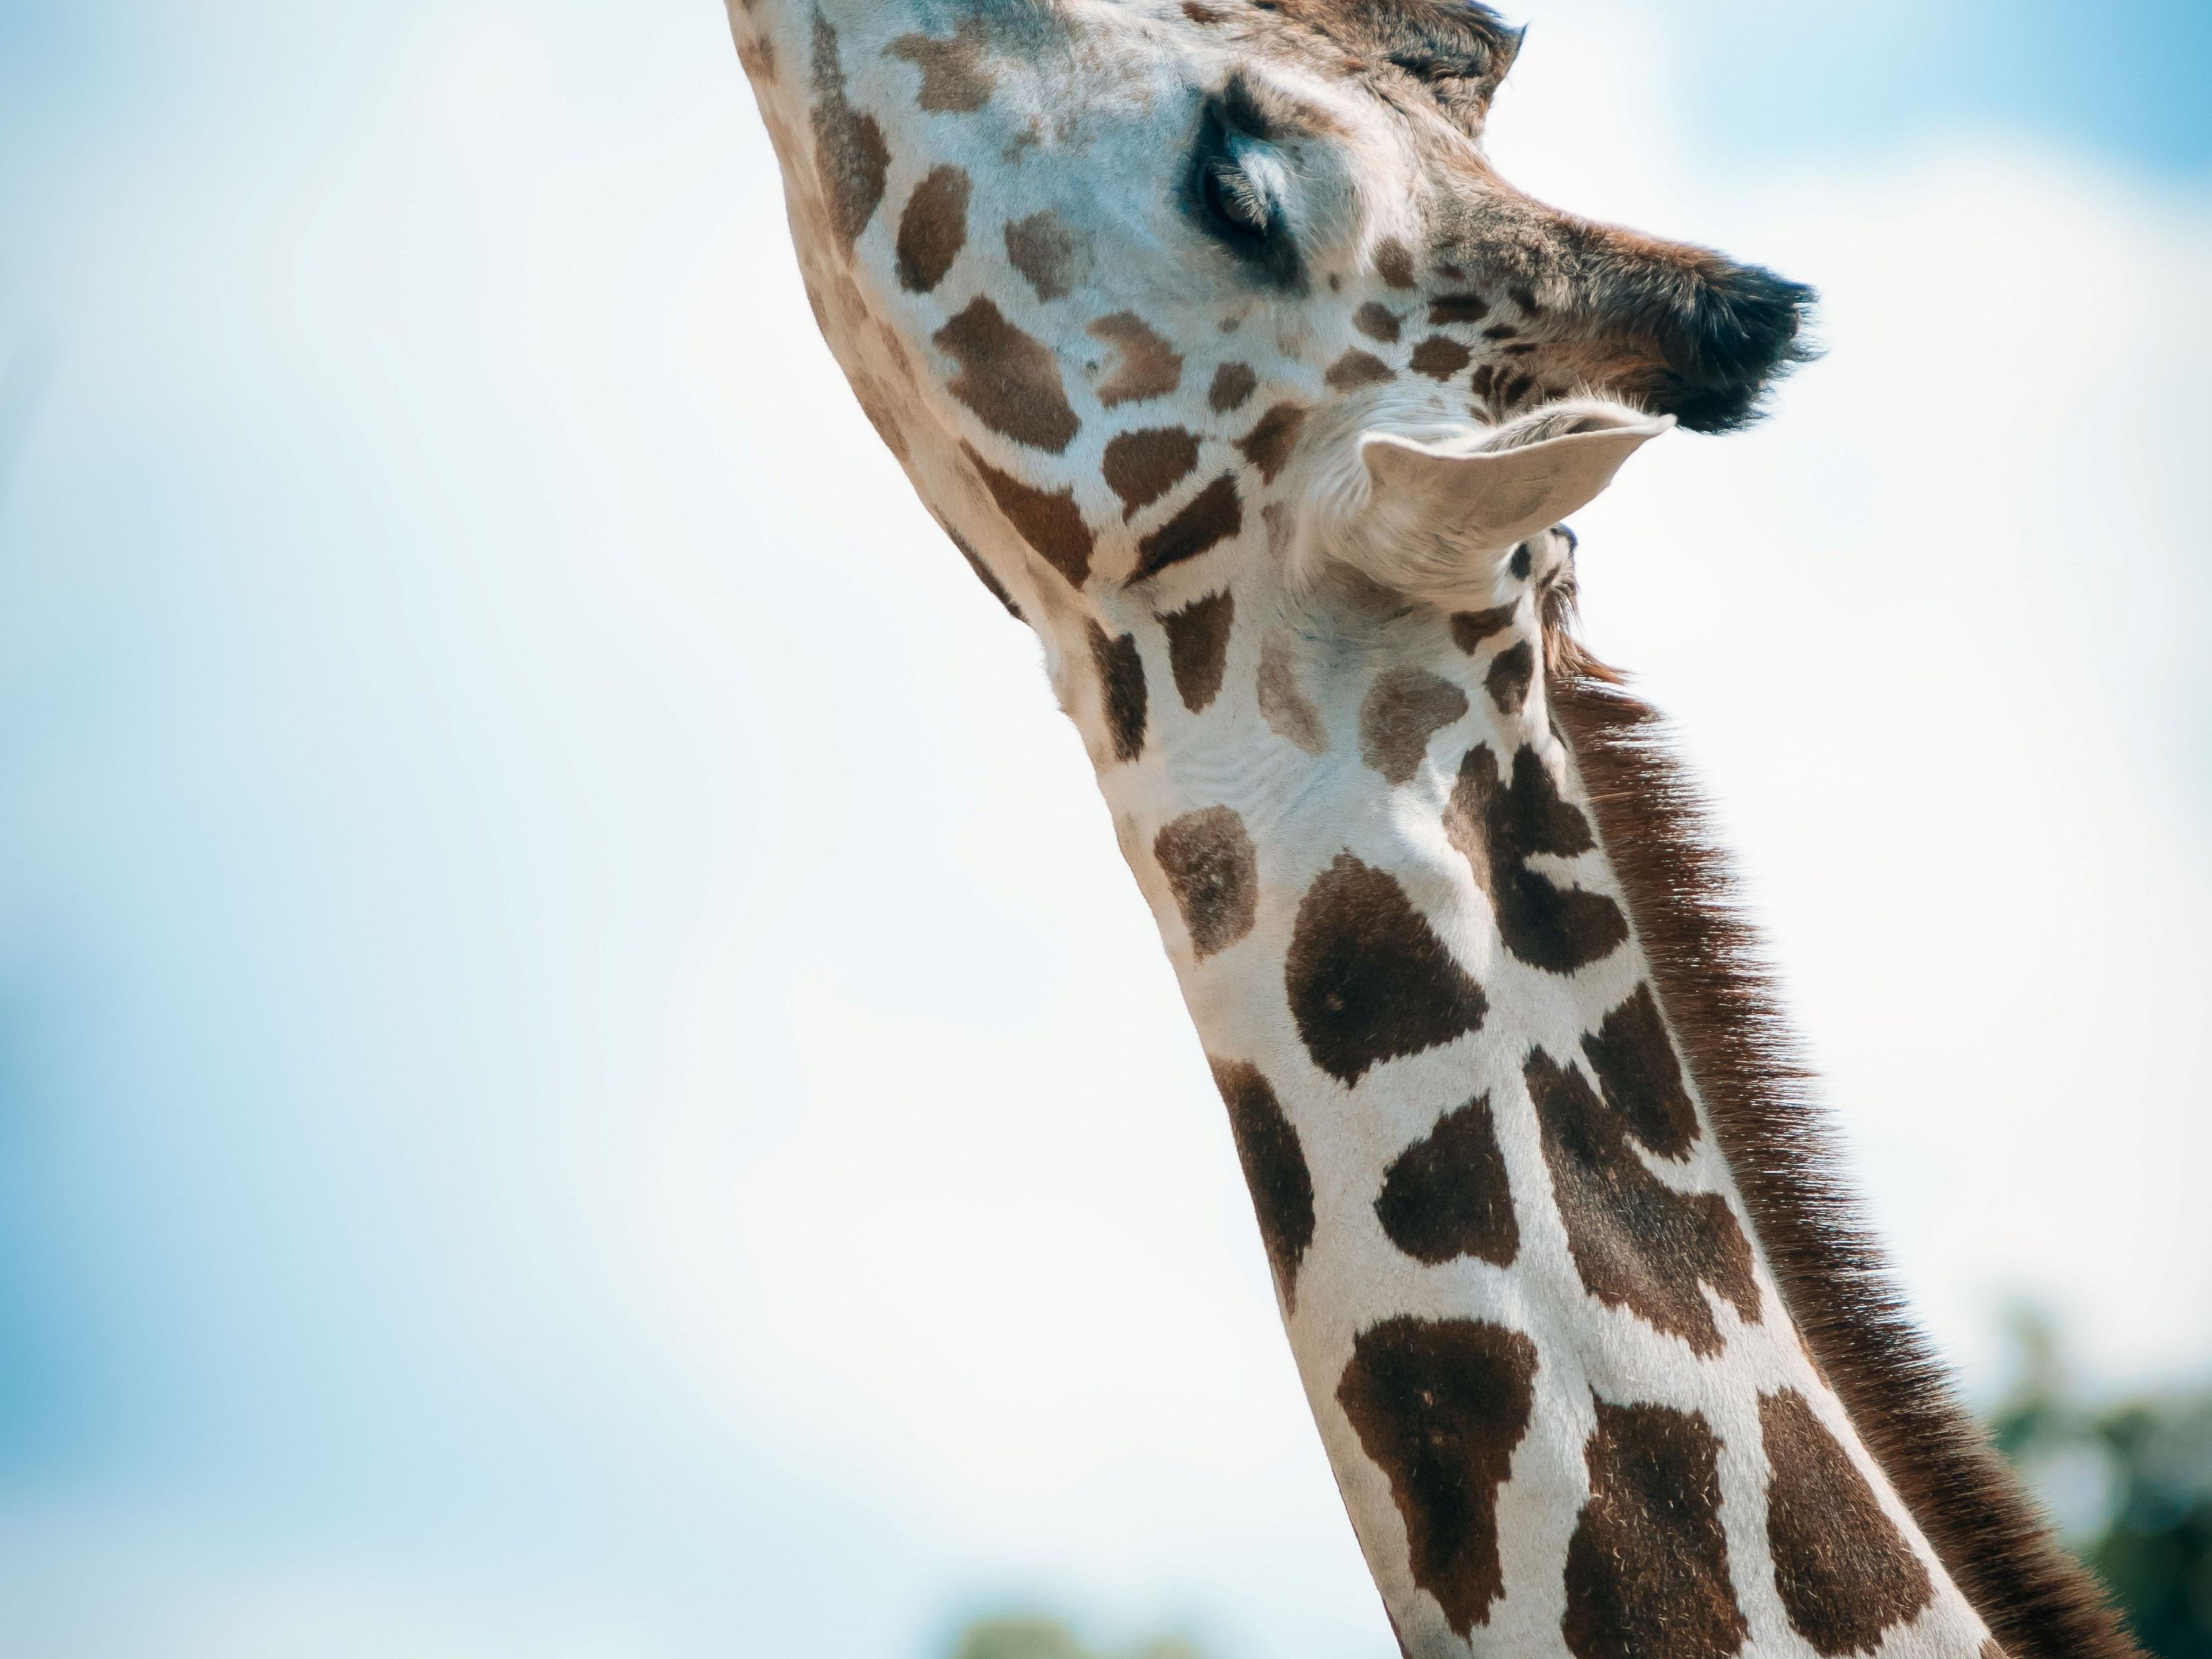 Come and enjoy our local zoo with a variety of wildlife and exhibits. Feed the giraffes, ride the Safari railway, enjoy the many different exhibits.